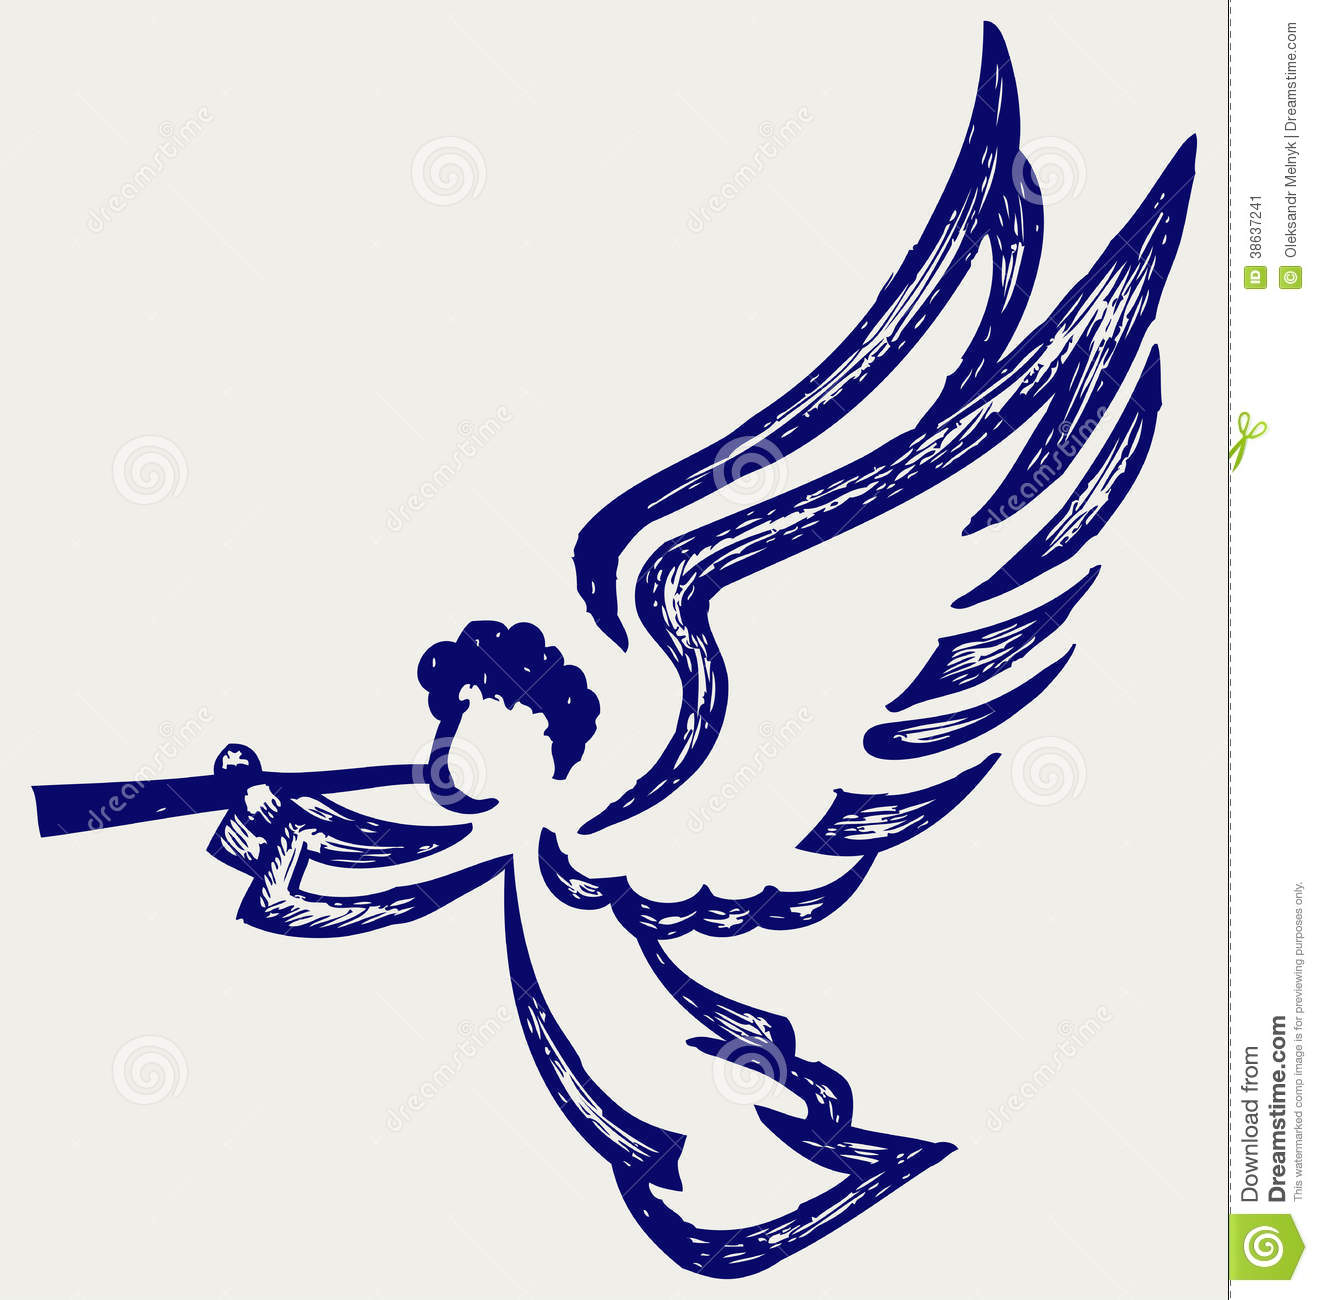 Angel With Trumpet Stock Image   Image  38637241